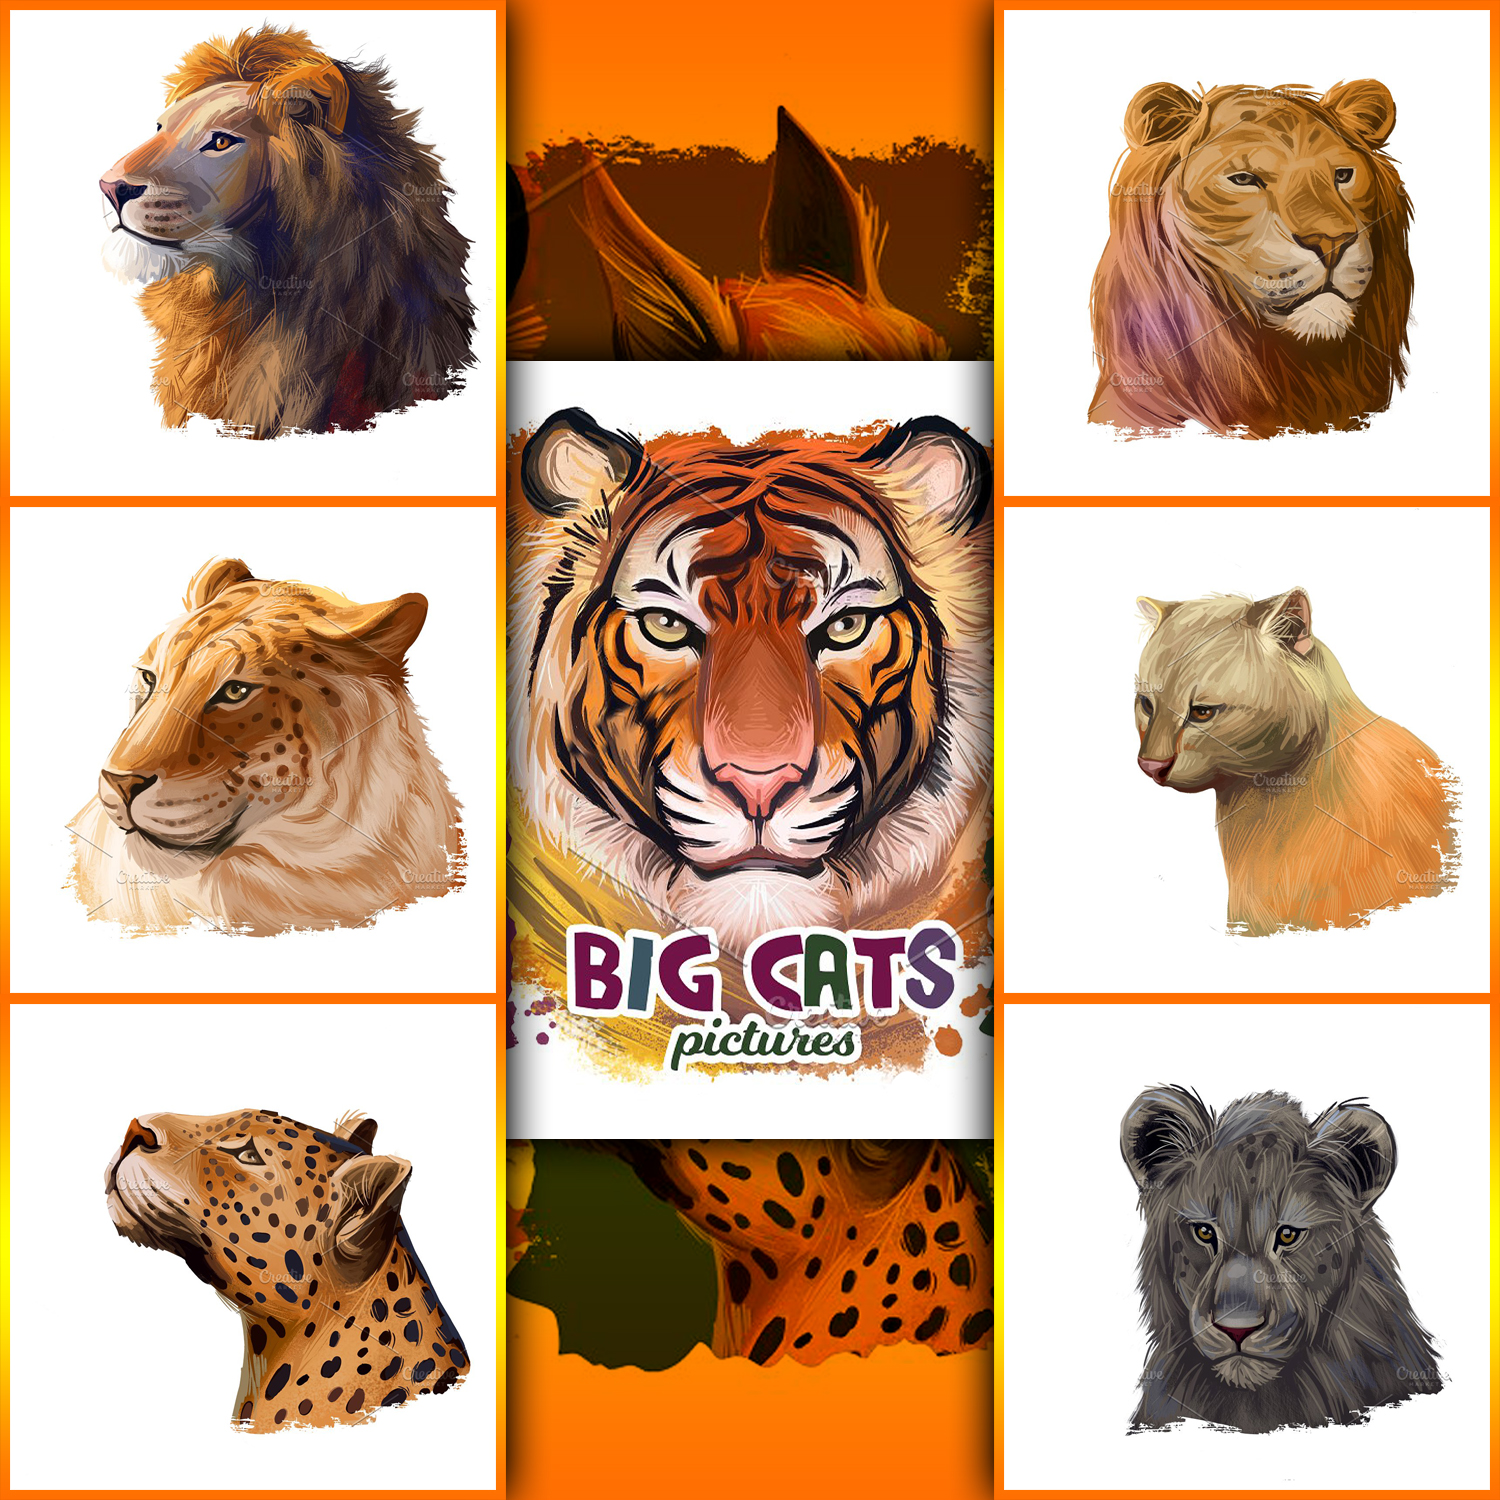 Preview bigcats adult wild animals.